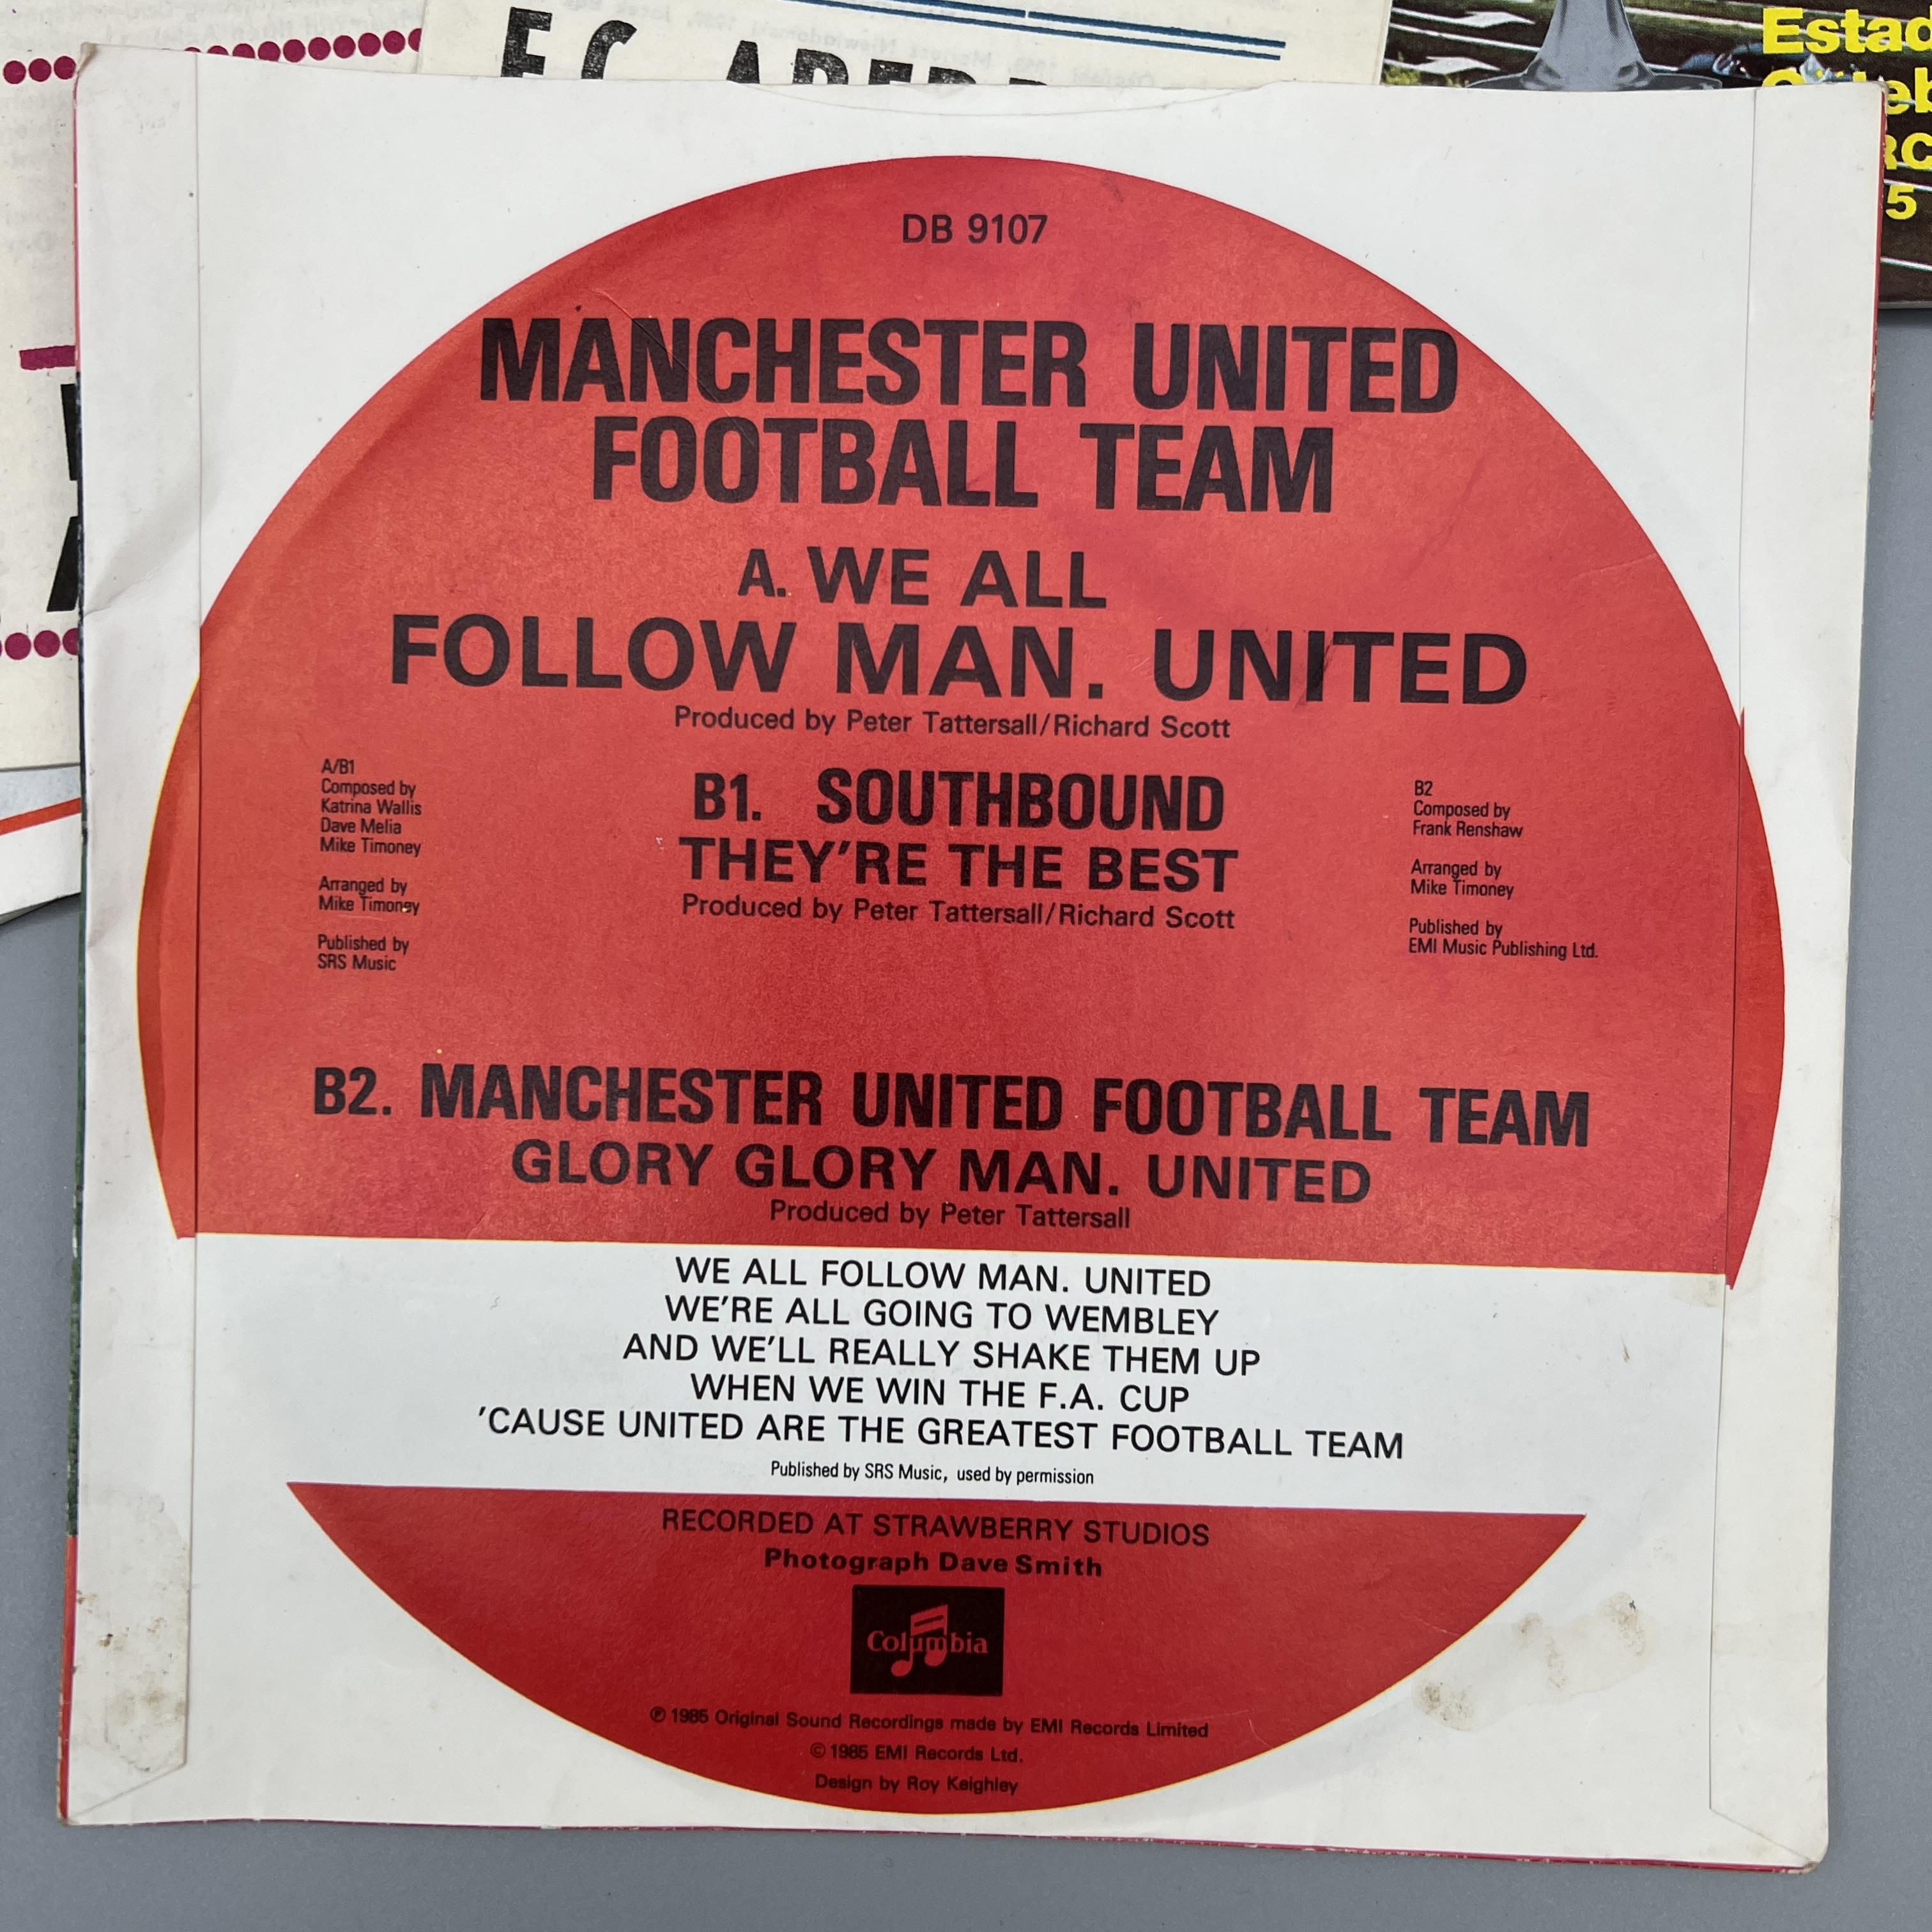 A mixed lot of rare Aberdeen football memorabilia and a Manchester United football record - Image 2 of 10